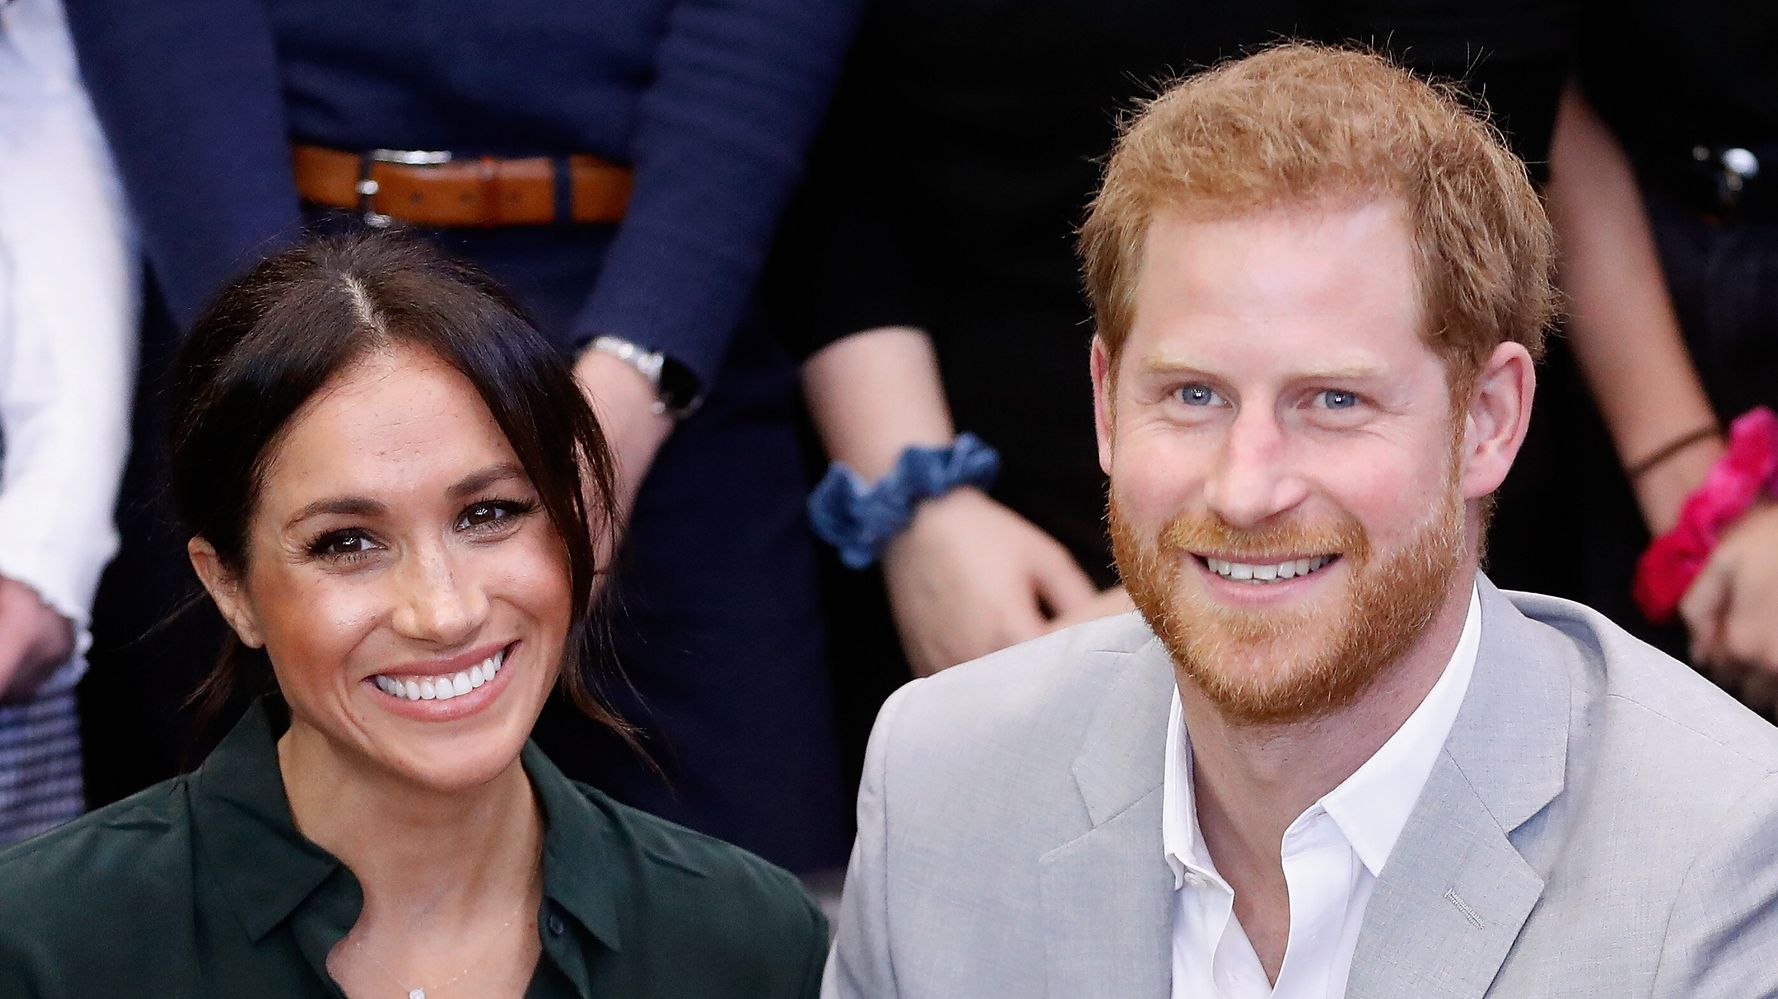 Meghan And Harry's Former Chief Of Staff Reveals What It's Like To Work For Them